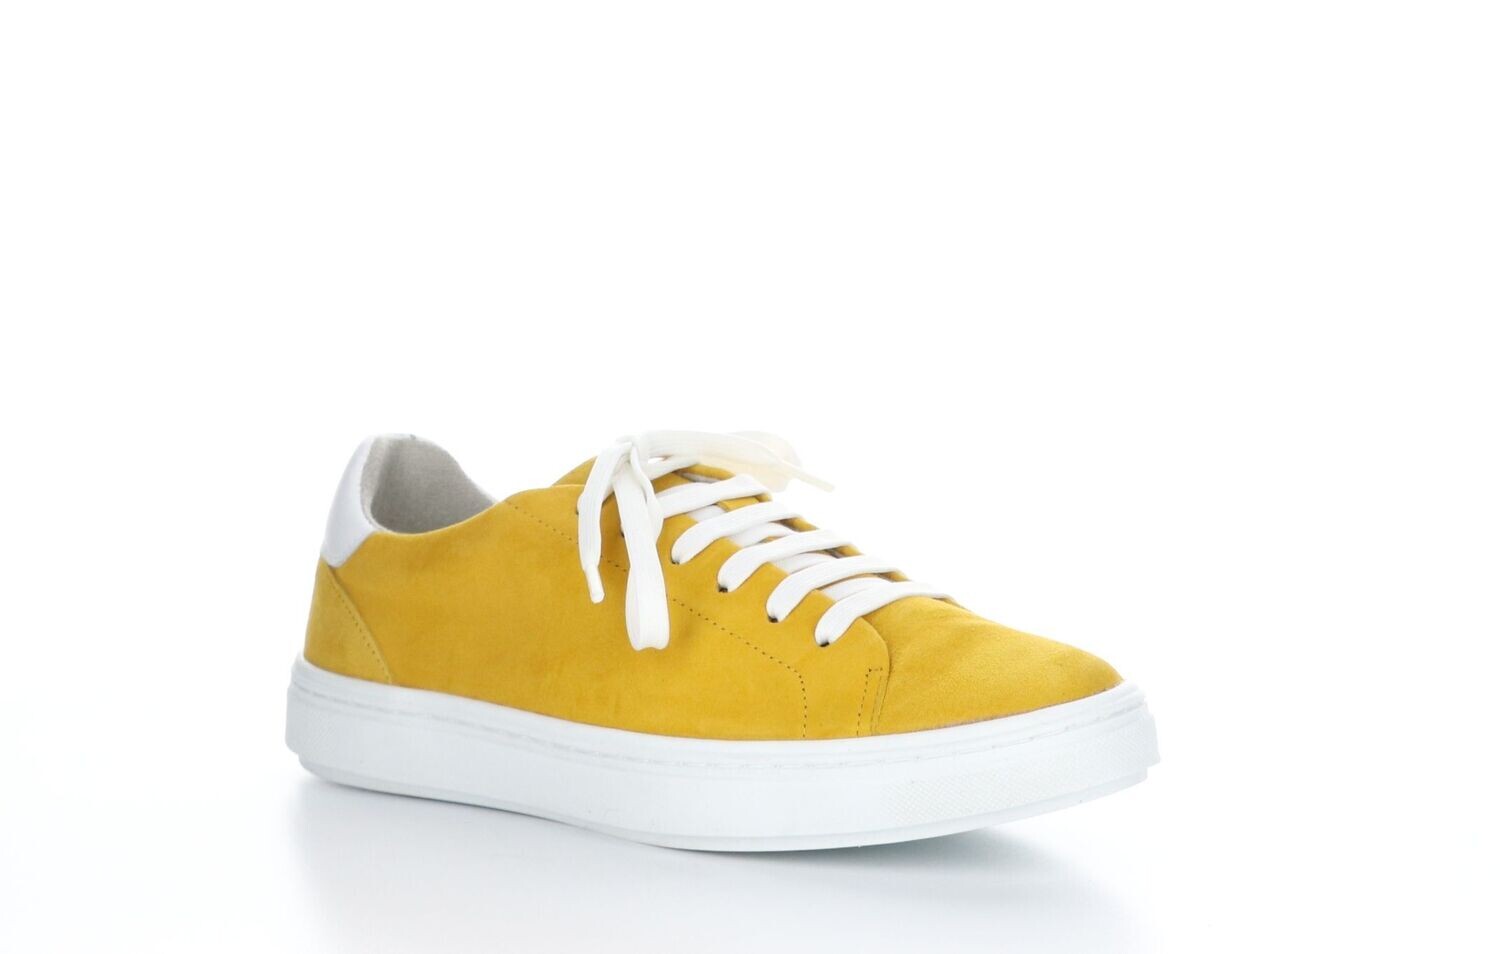 Bos & Co. Chelsey Lux Suede Sneaker